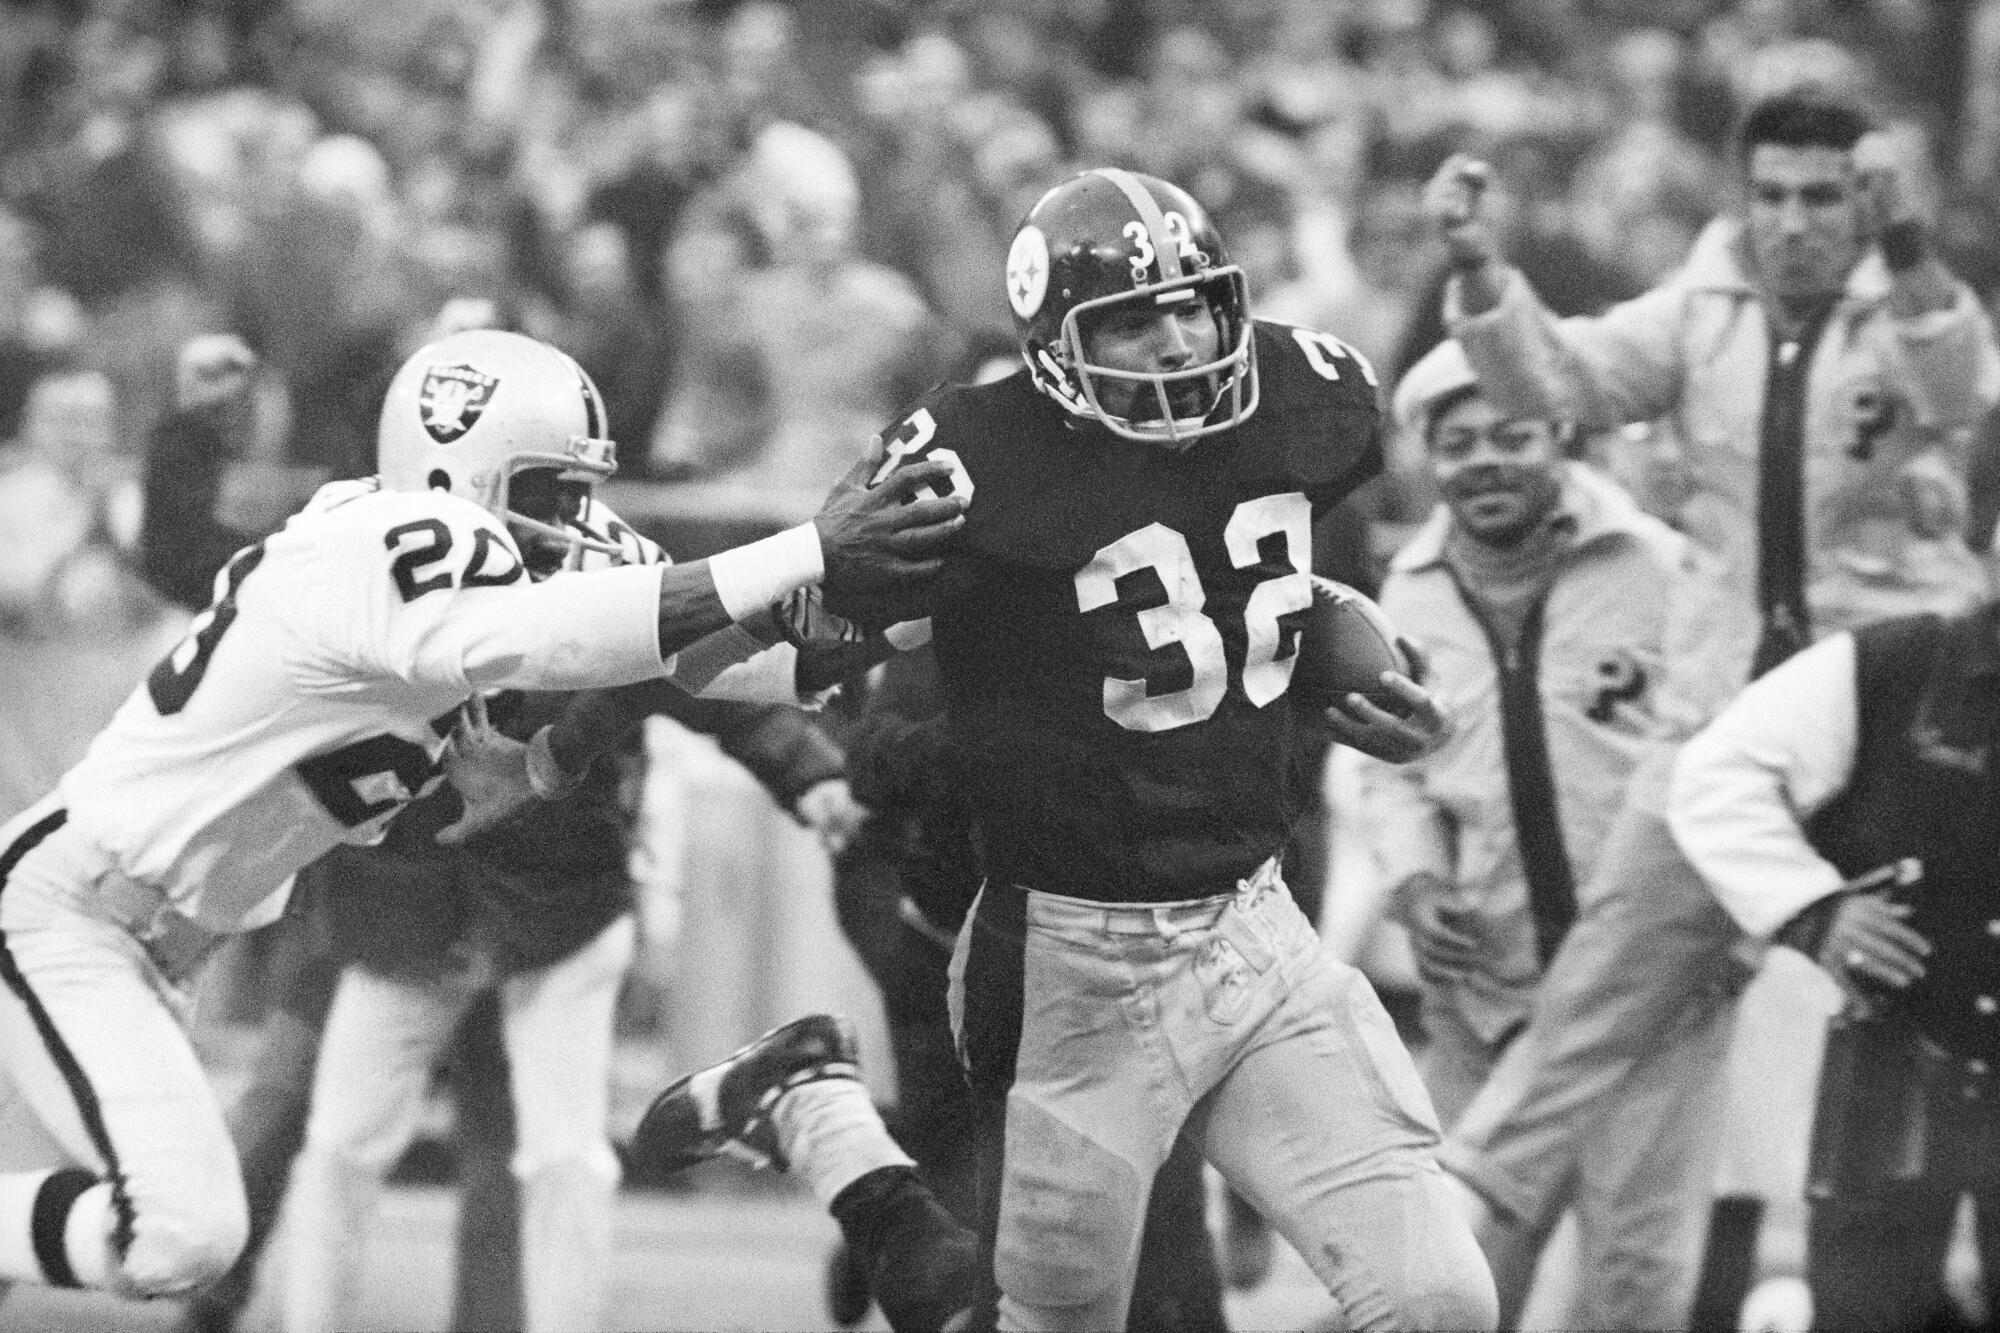 Immaculate Reception at 50: How it changed the Steelers forever